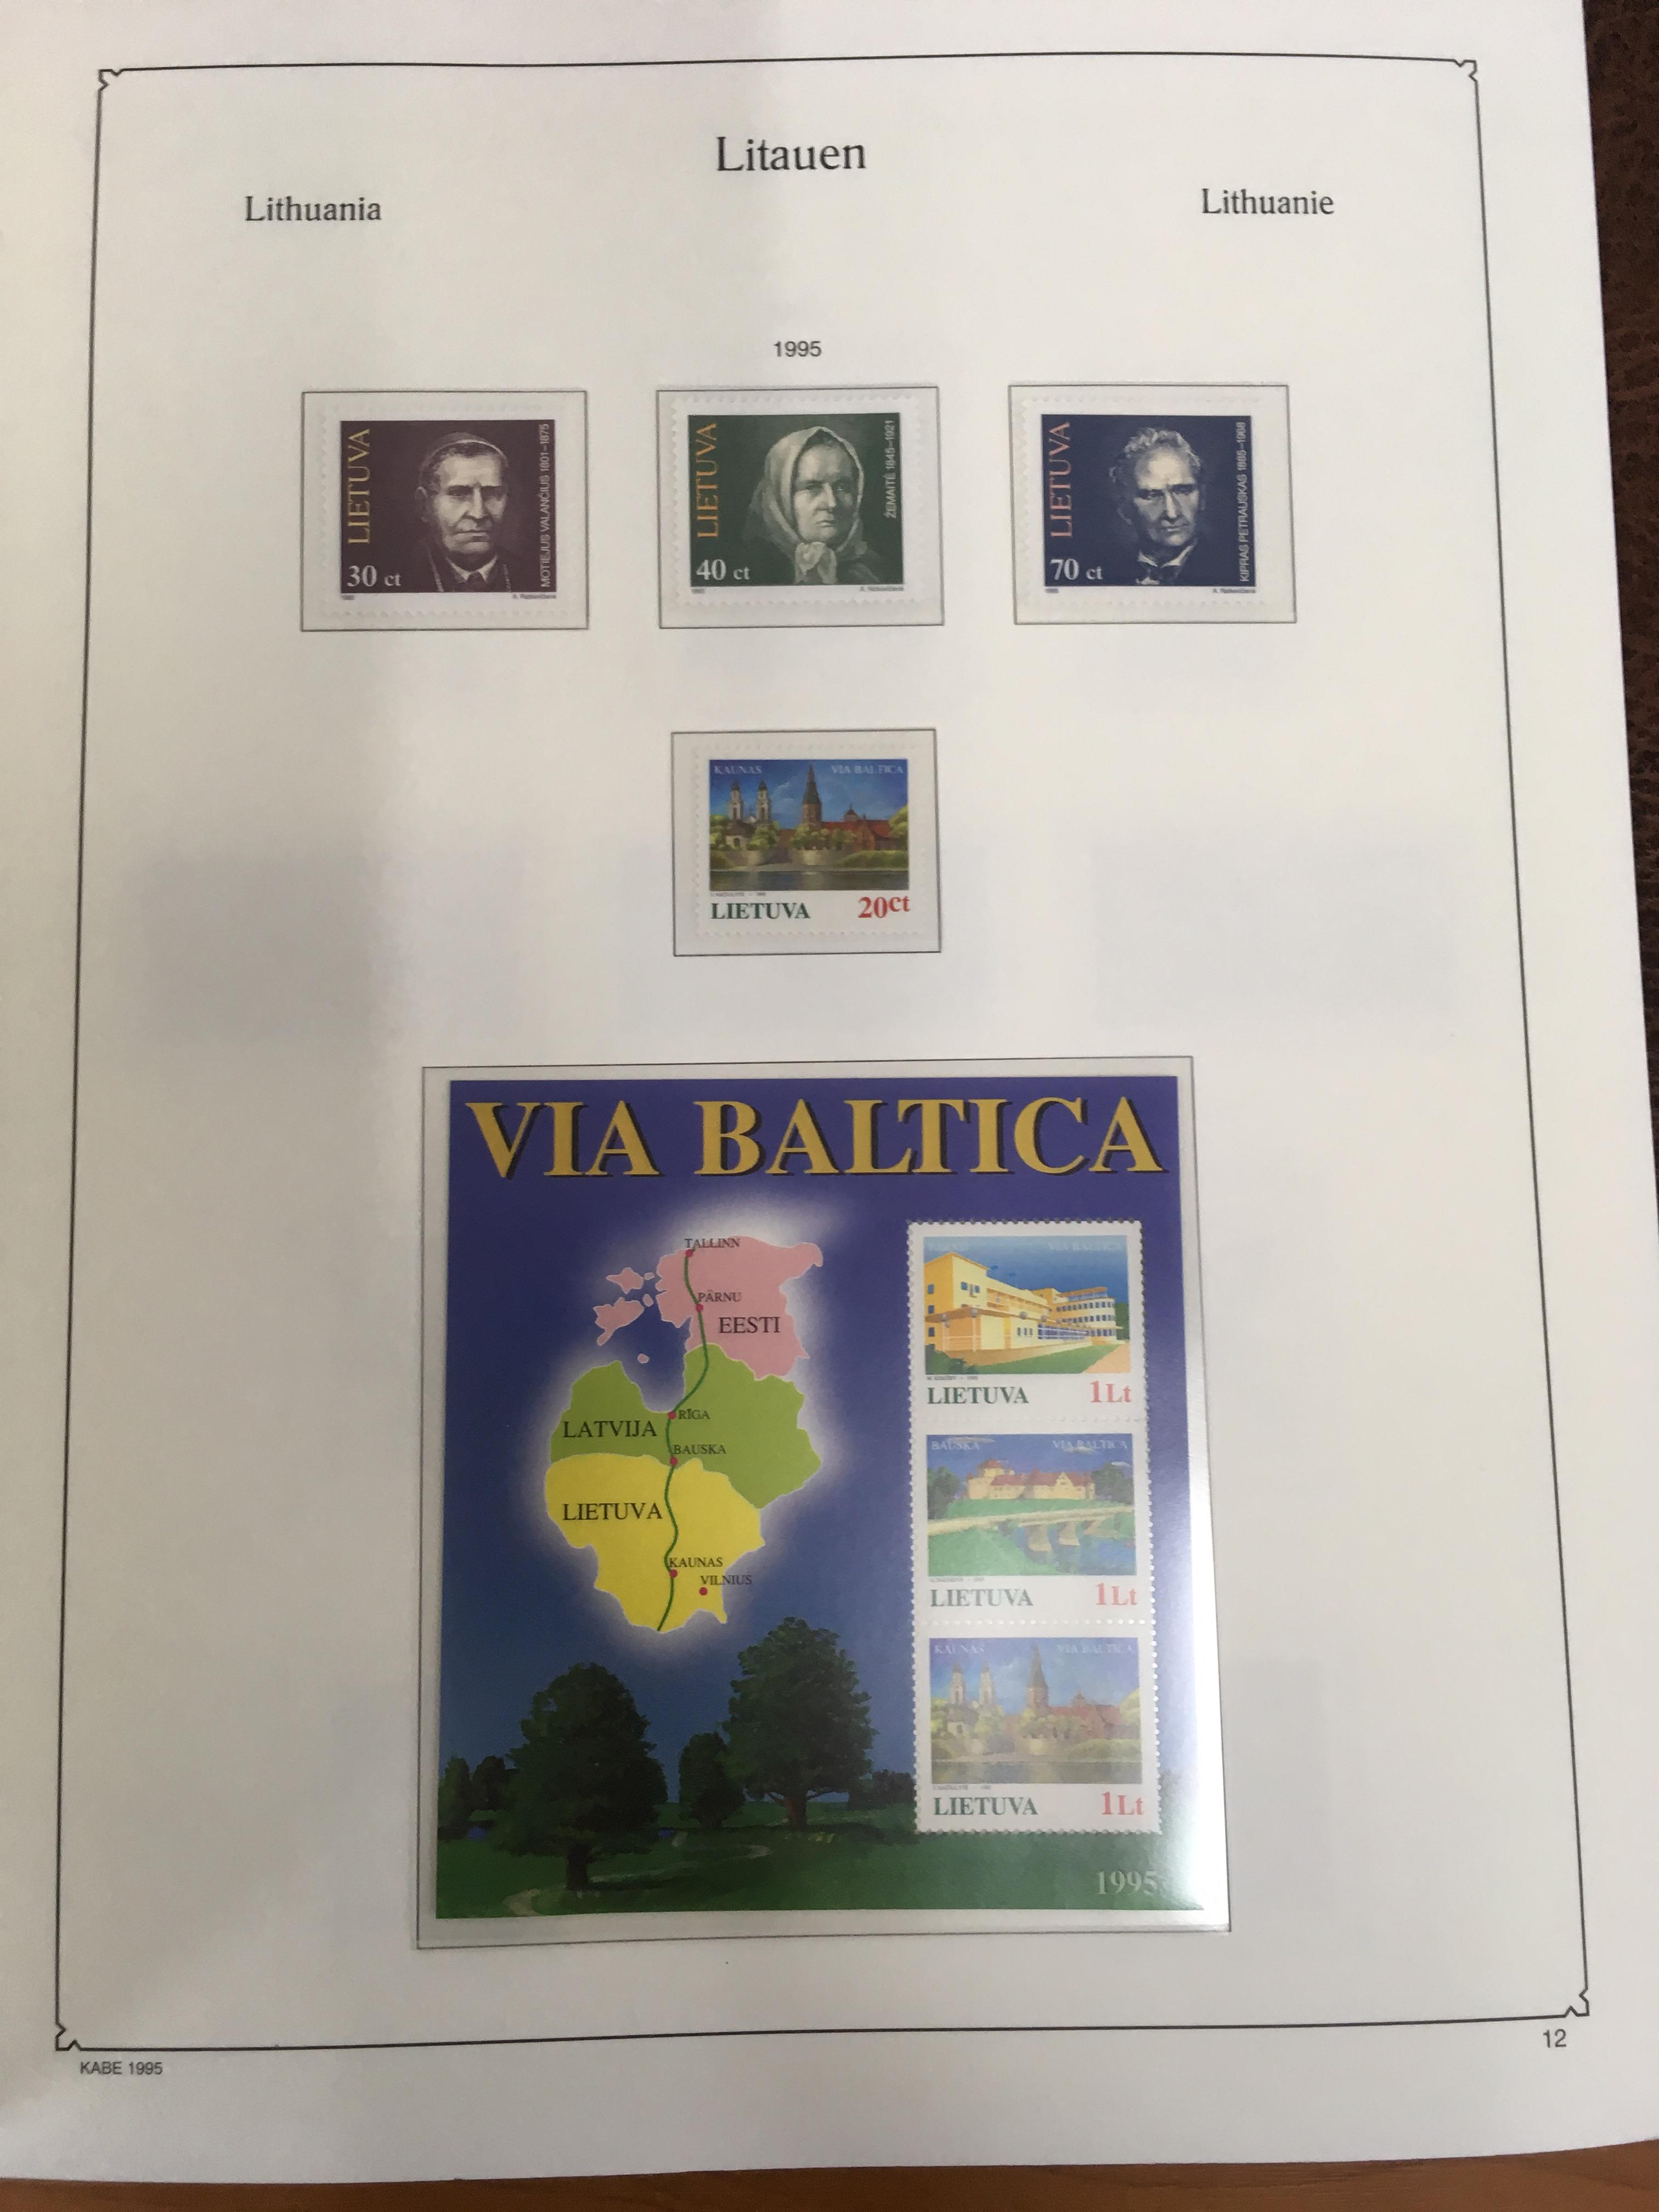 STAMPS: KA-BE ALBUM WITH A COLLECTION MINT LATVIA, LITHUANIA AND ESTONIA 1991-9 ISSUES. - Image 10 of 45